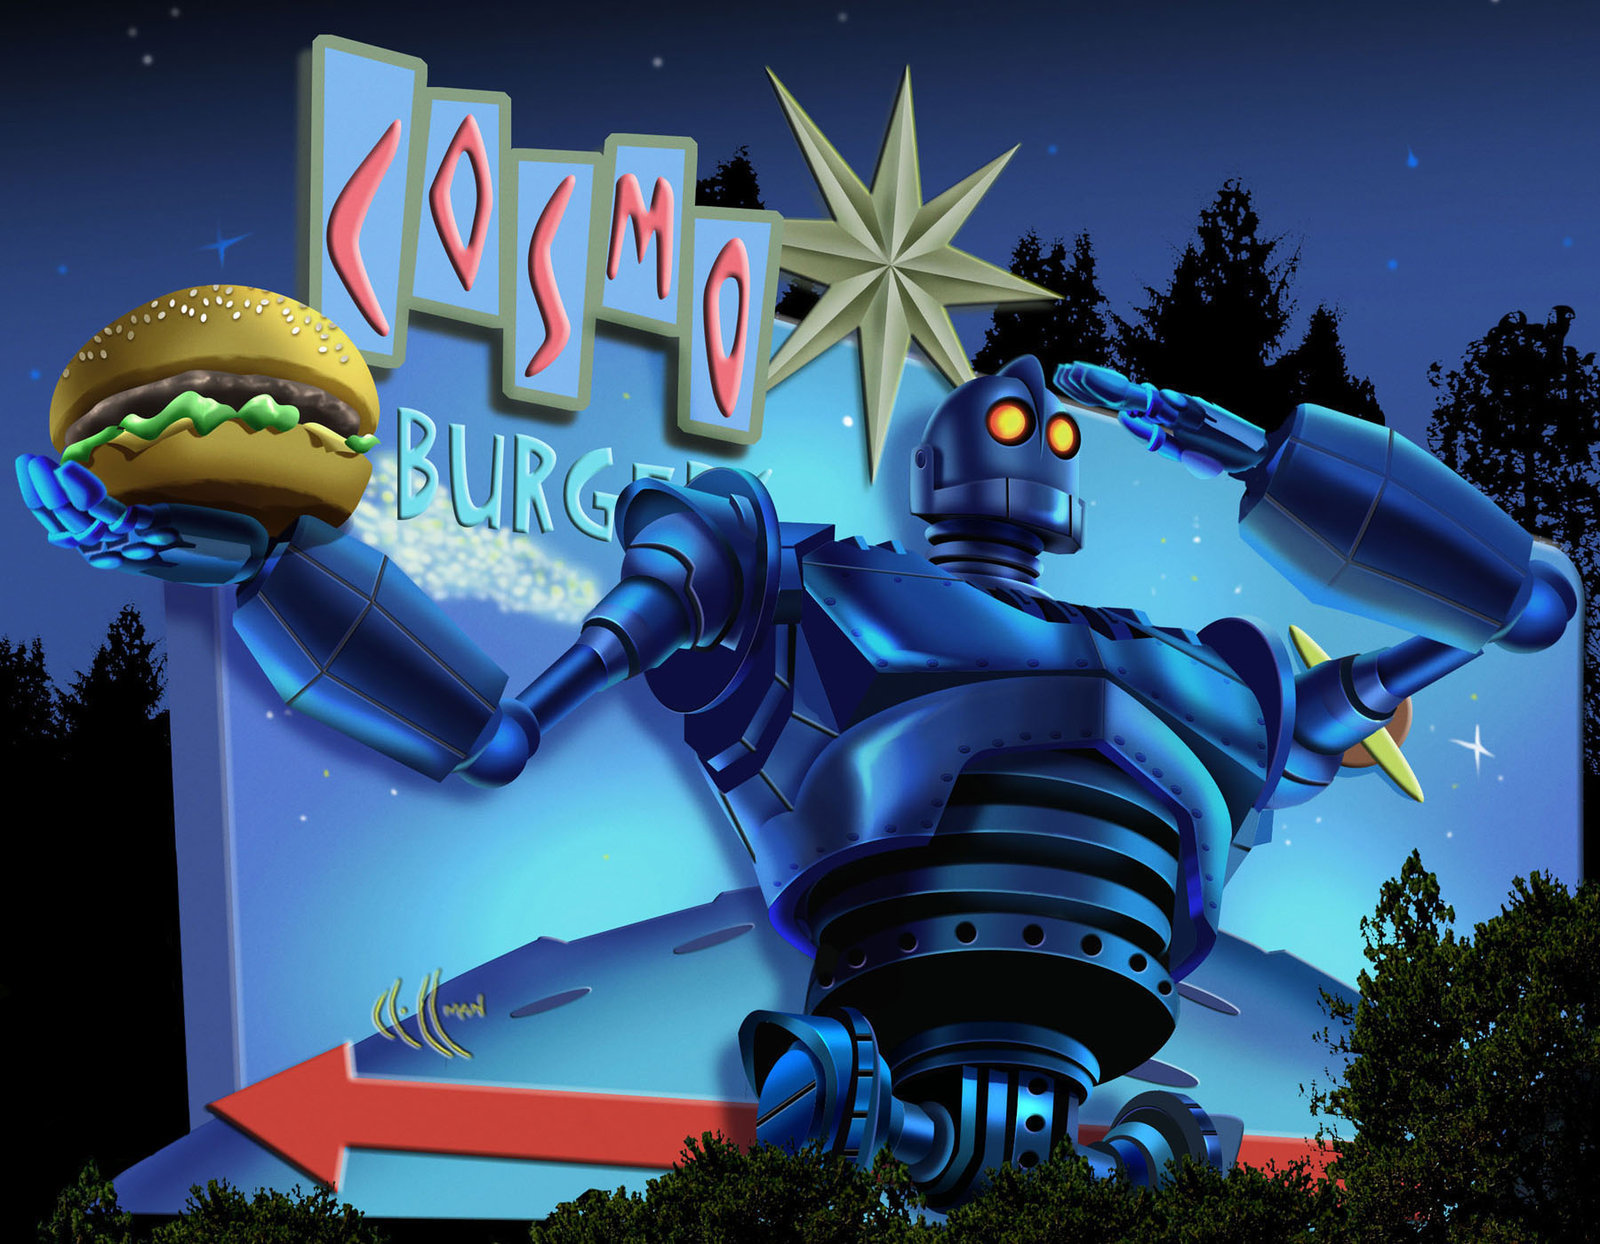 The Iron Giant burger pitch by choffman36